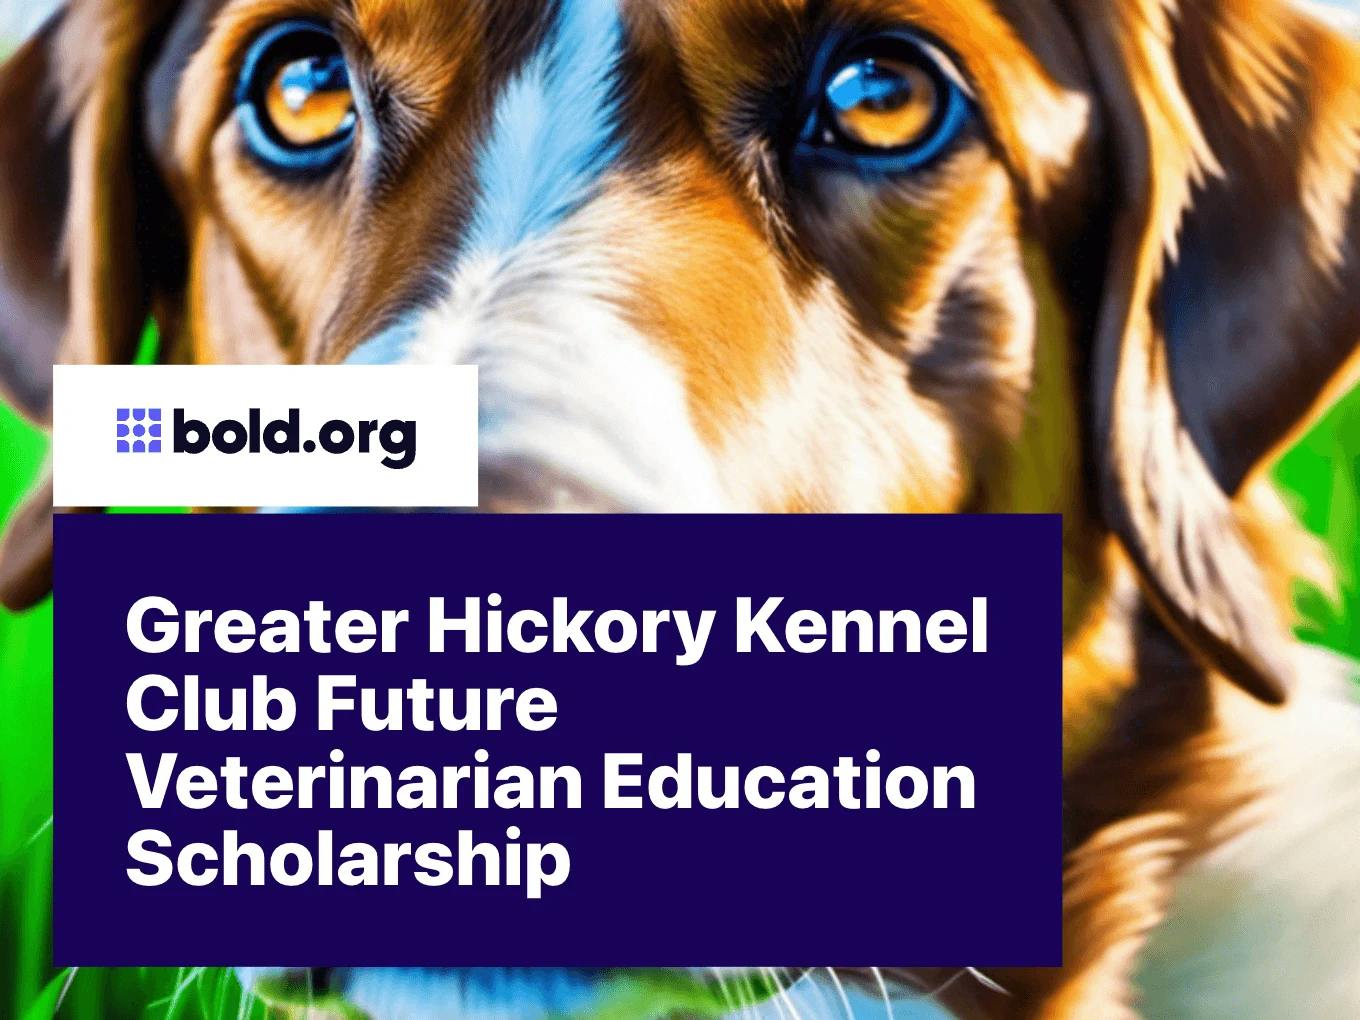 Greater Hickory Kennel Club Future Veterinarian Education Scholarship